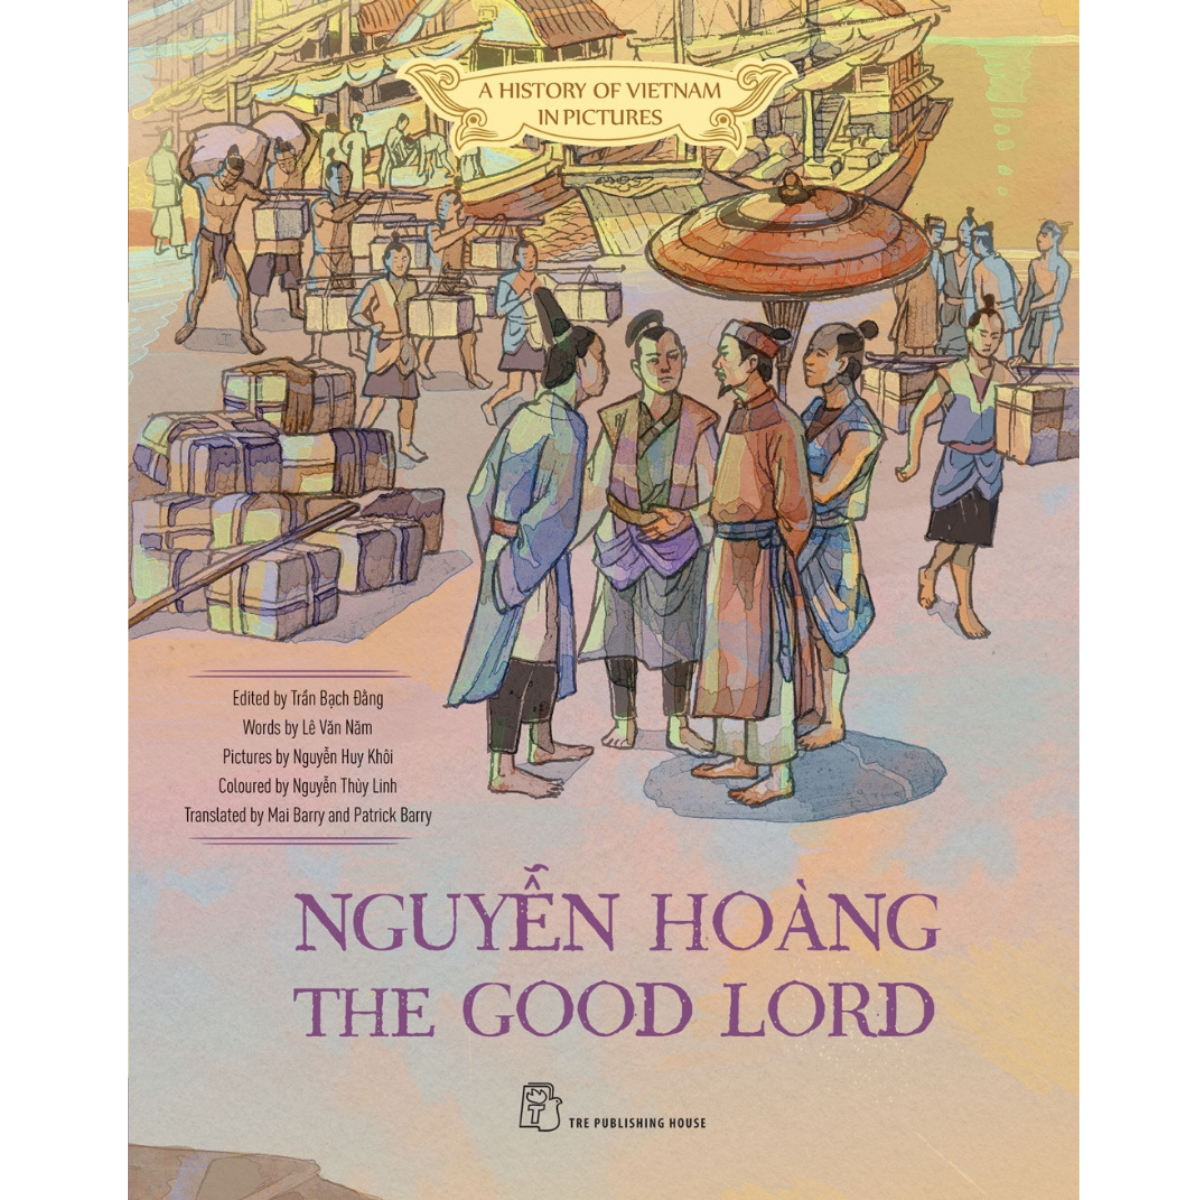 Sách - A History of Vietnam in Pictures: Nguyễn Hoàng the Good Lord (In Colour) (NXBT)